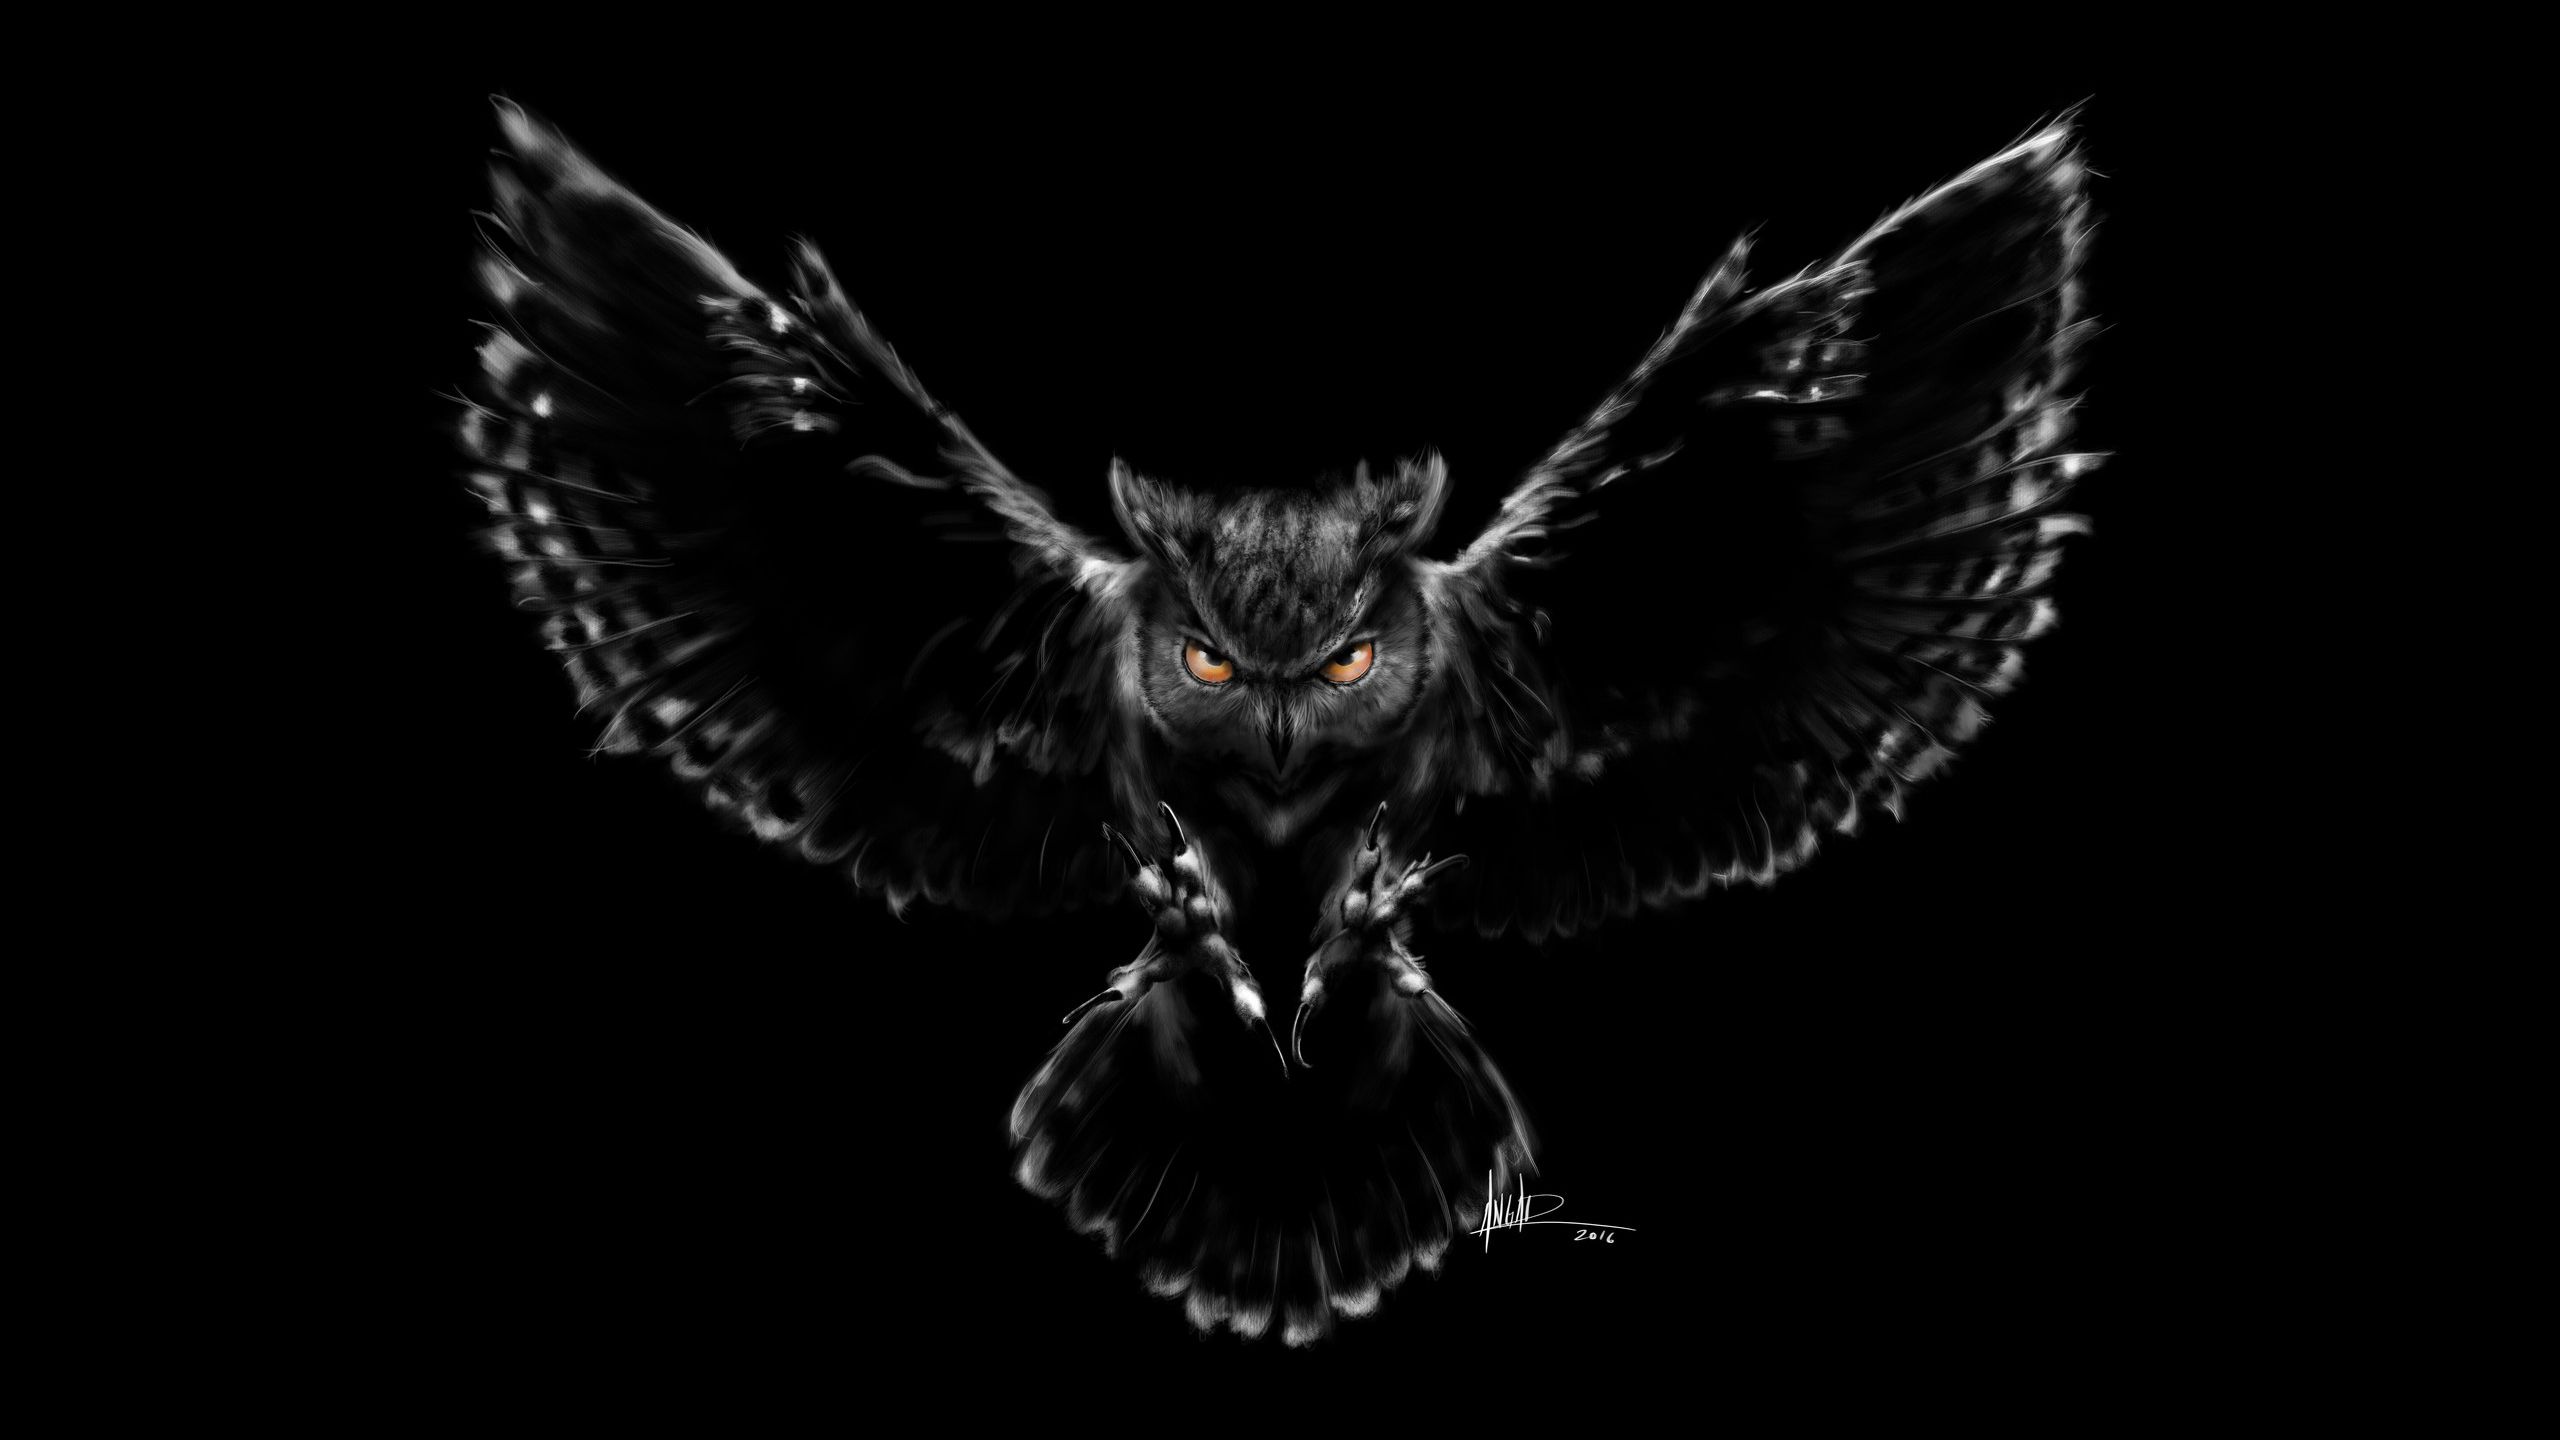 Scary Owl Wallpapers | Wallpapers HD